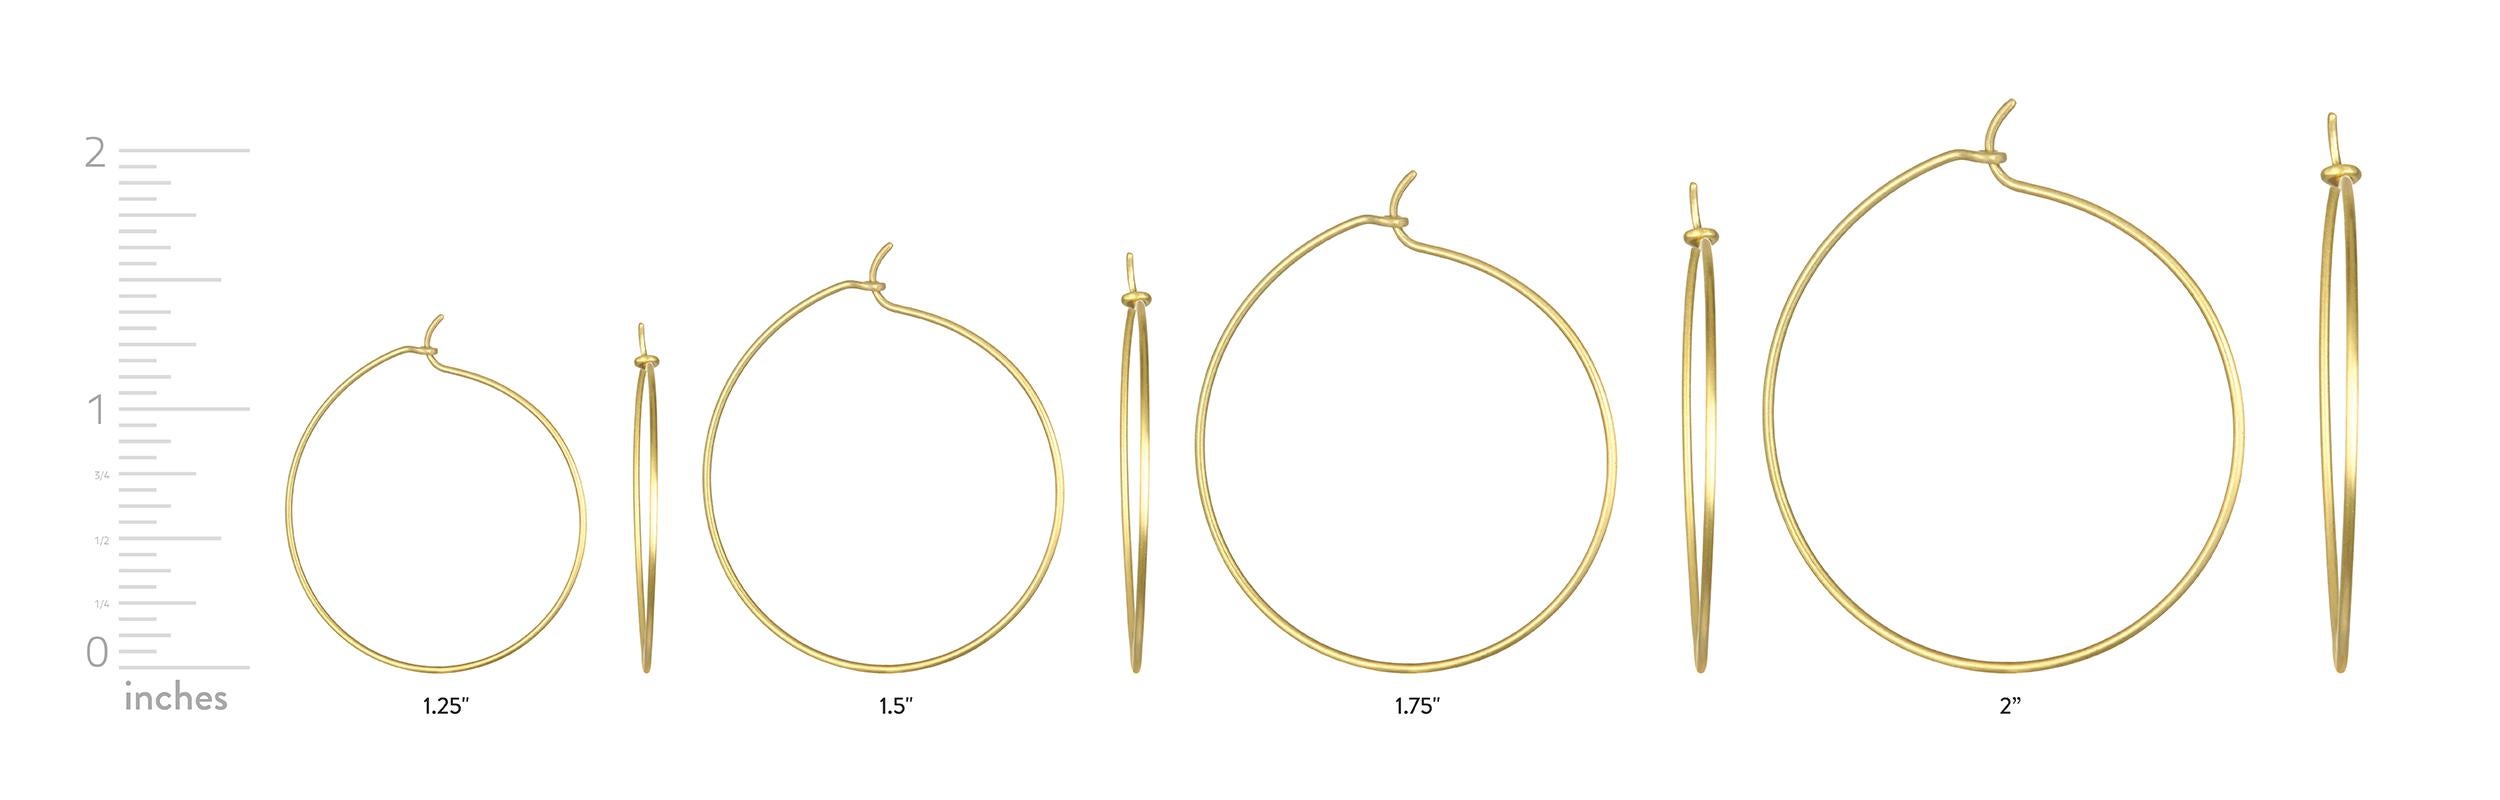 Faye Kim's 18 Karat Gold Moon and Star charms shine brightly from these classic, wire hoops.  Charms are removable.

Length of Charms:  8-10mm

Wire Hoops:  1.75